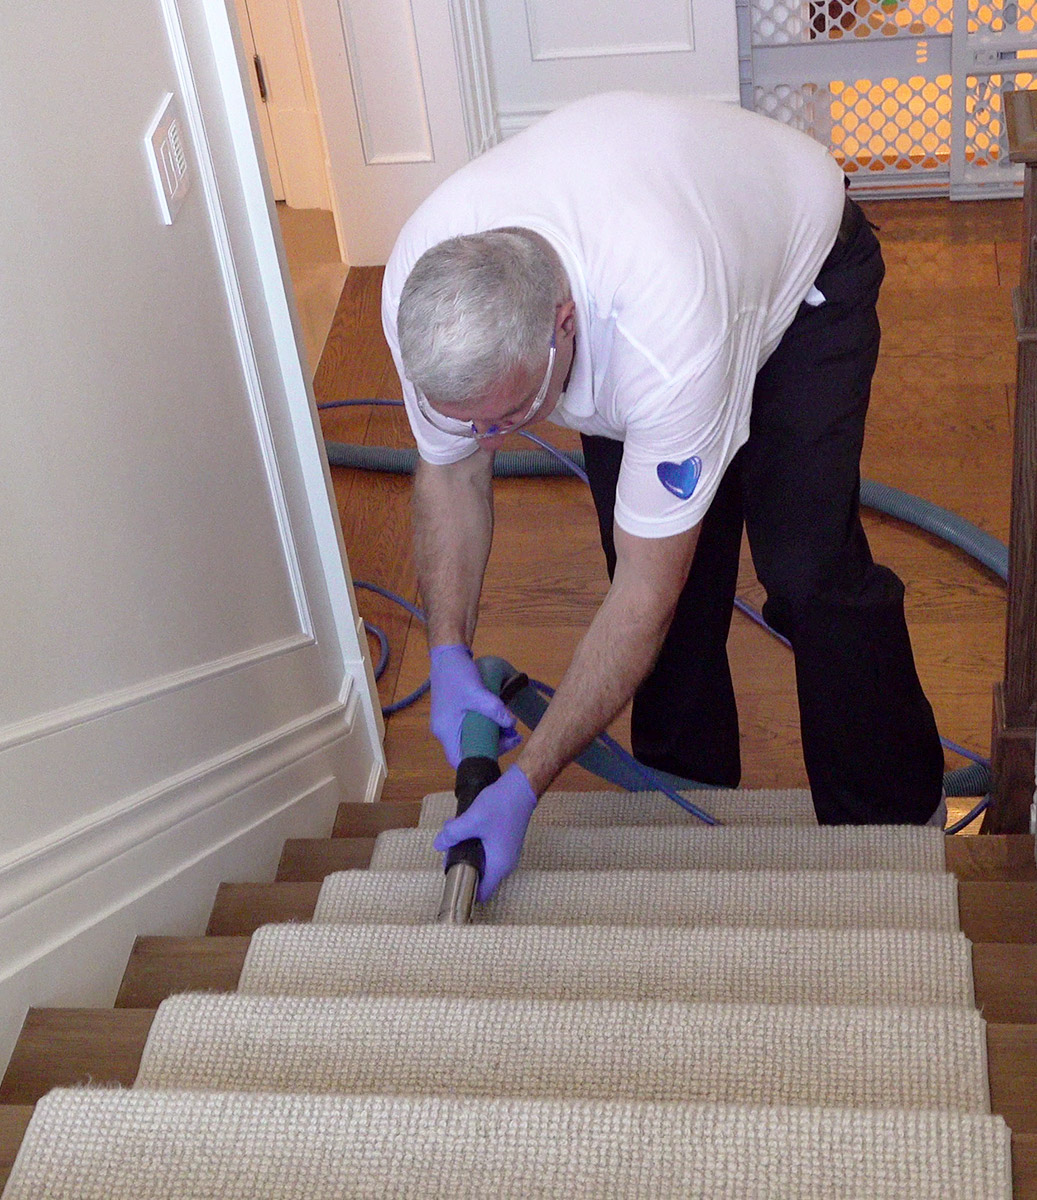 professional carpet cleaning services near me